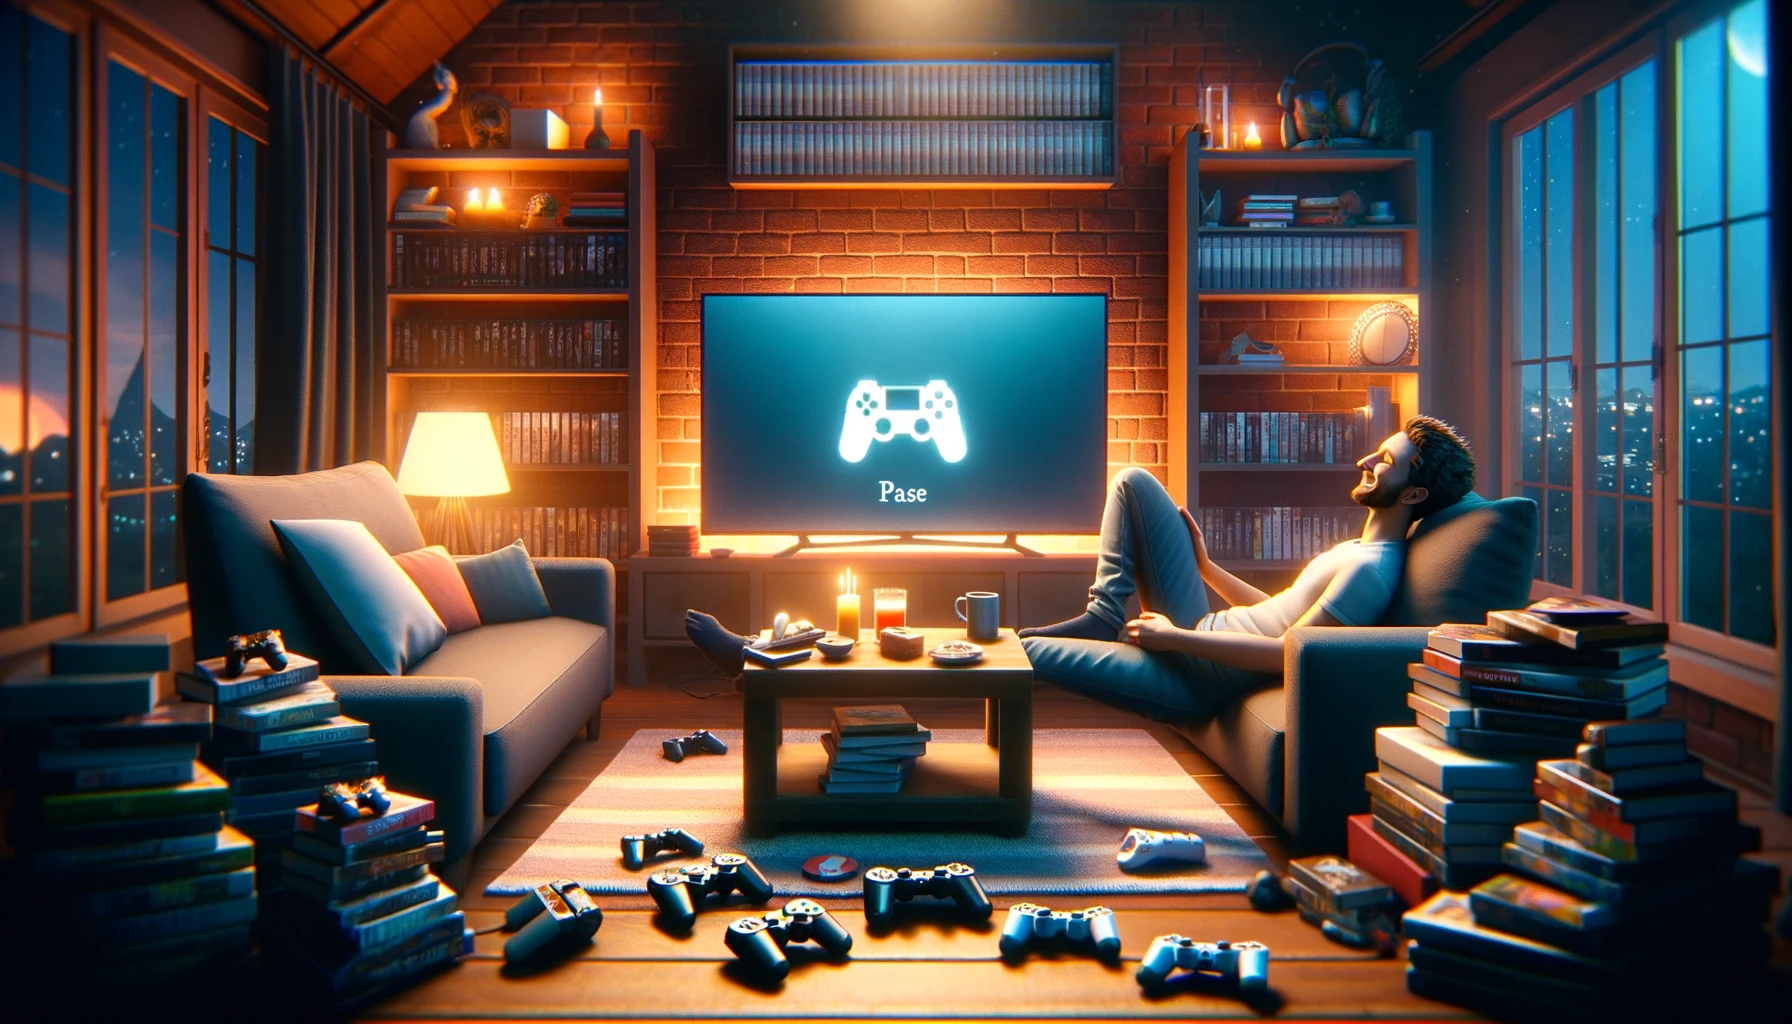 DALL·E 2024-01-11 22.31.15 - The image depicts a cozy living room in the evening, with a relaxed atmosphere. In the center, there's a happy gamer lounging on a comfortable sofa.